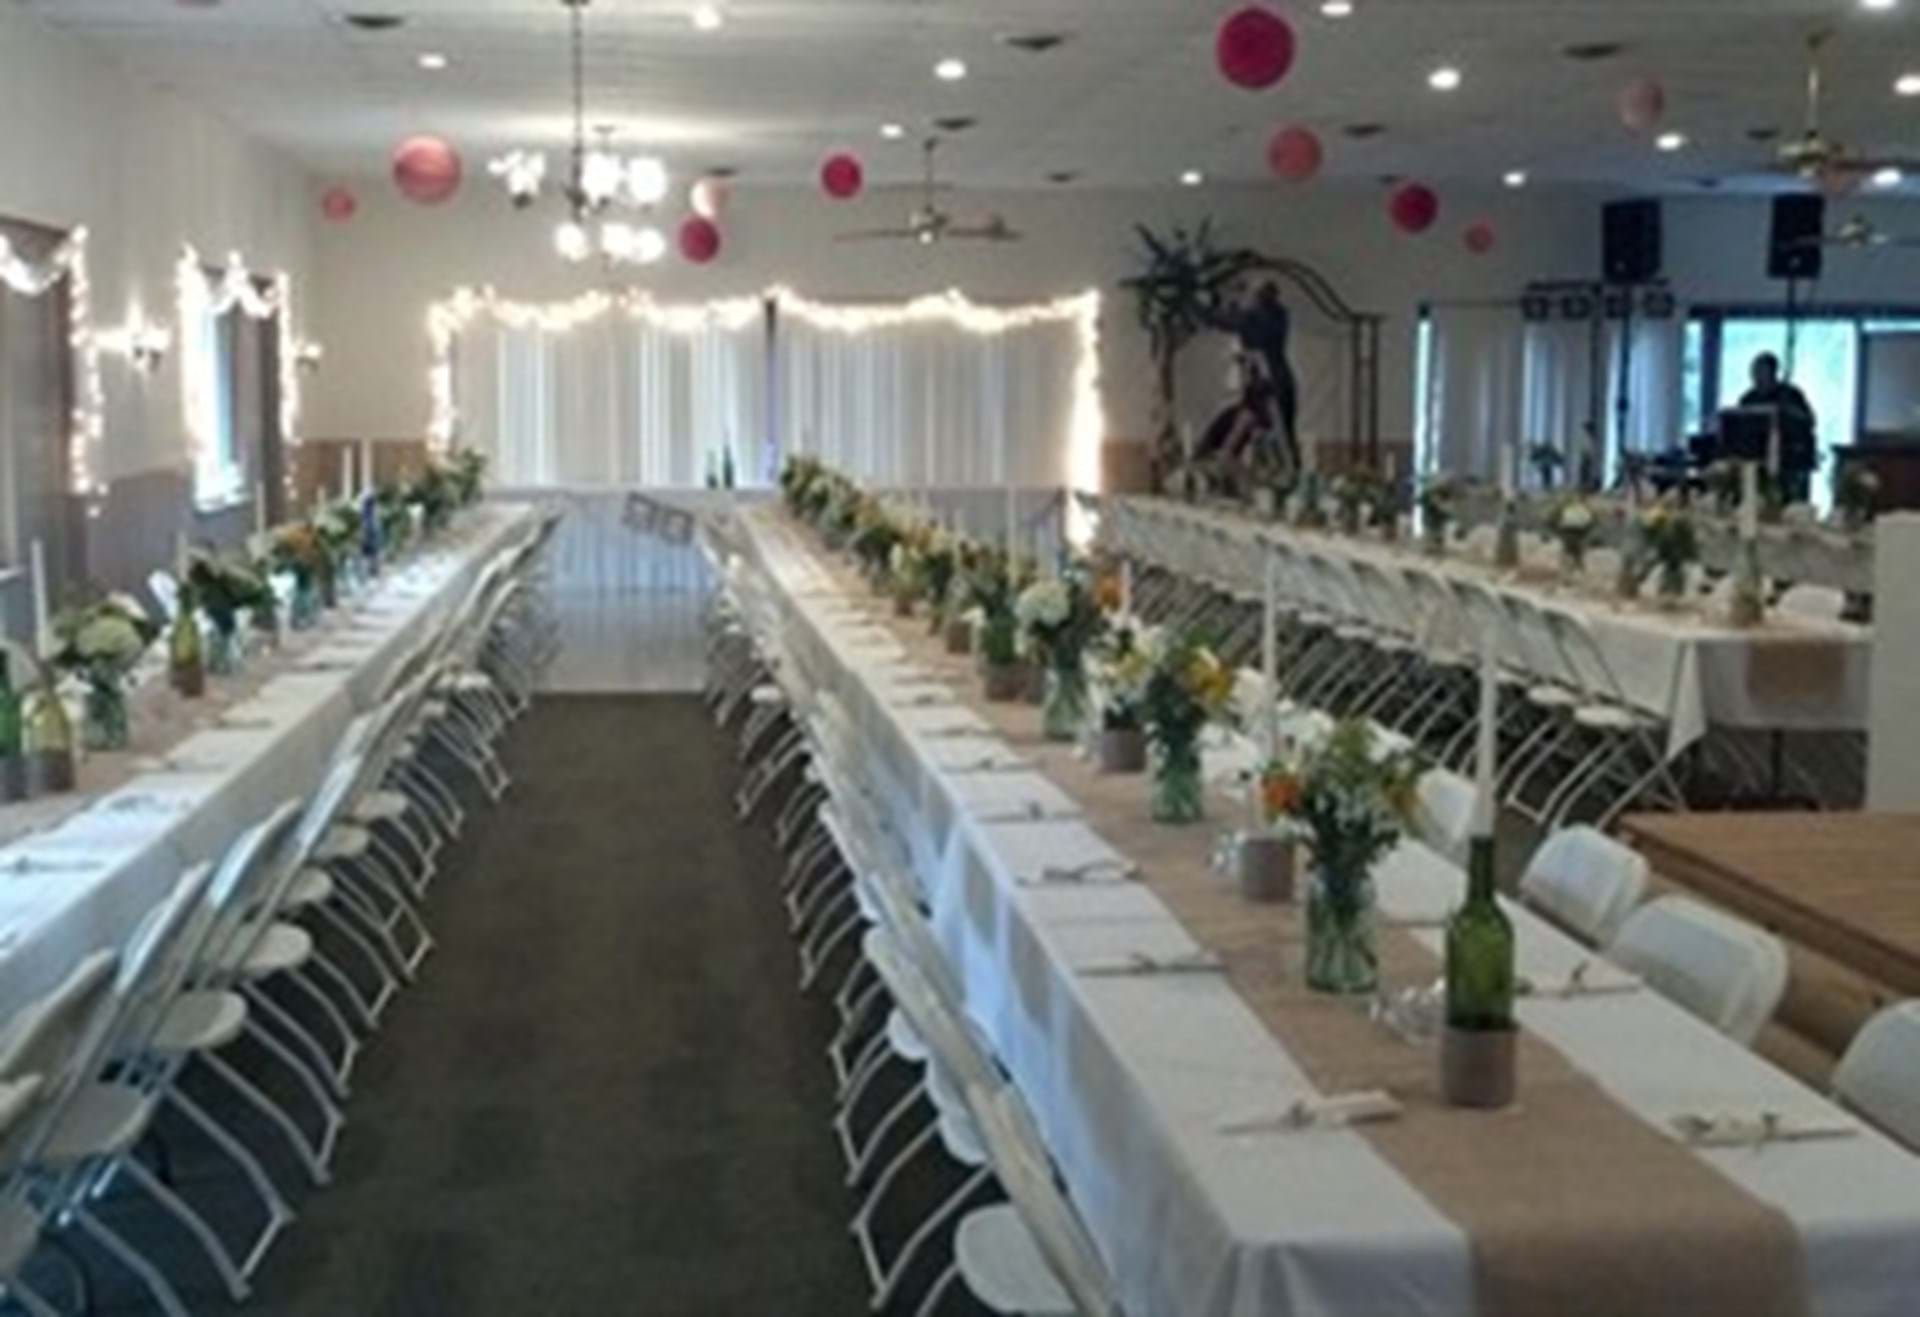 Room for Wedding Receptions